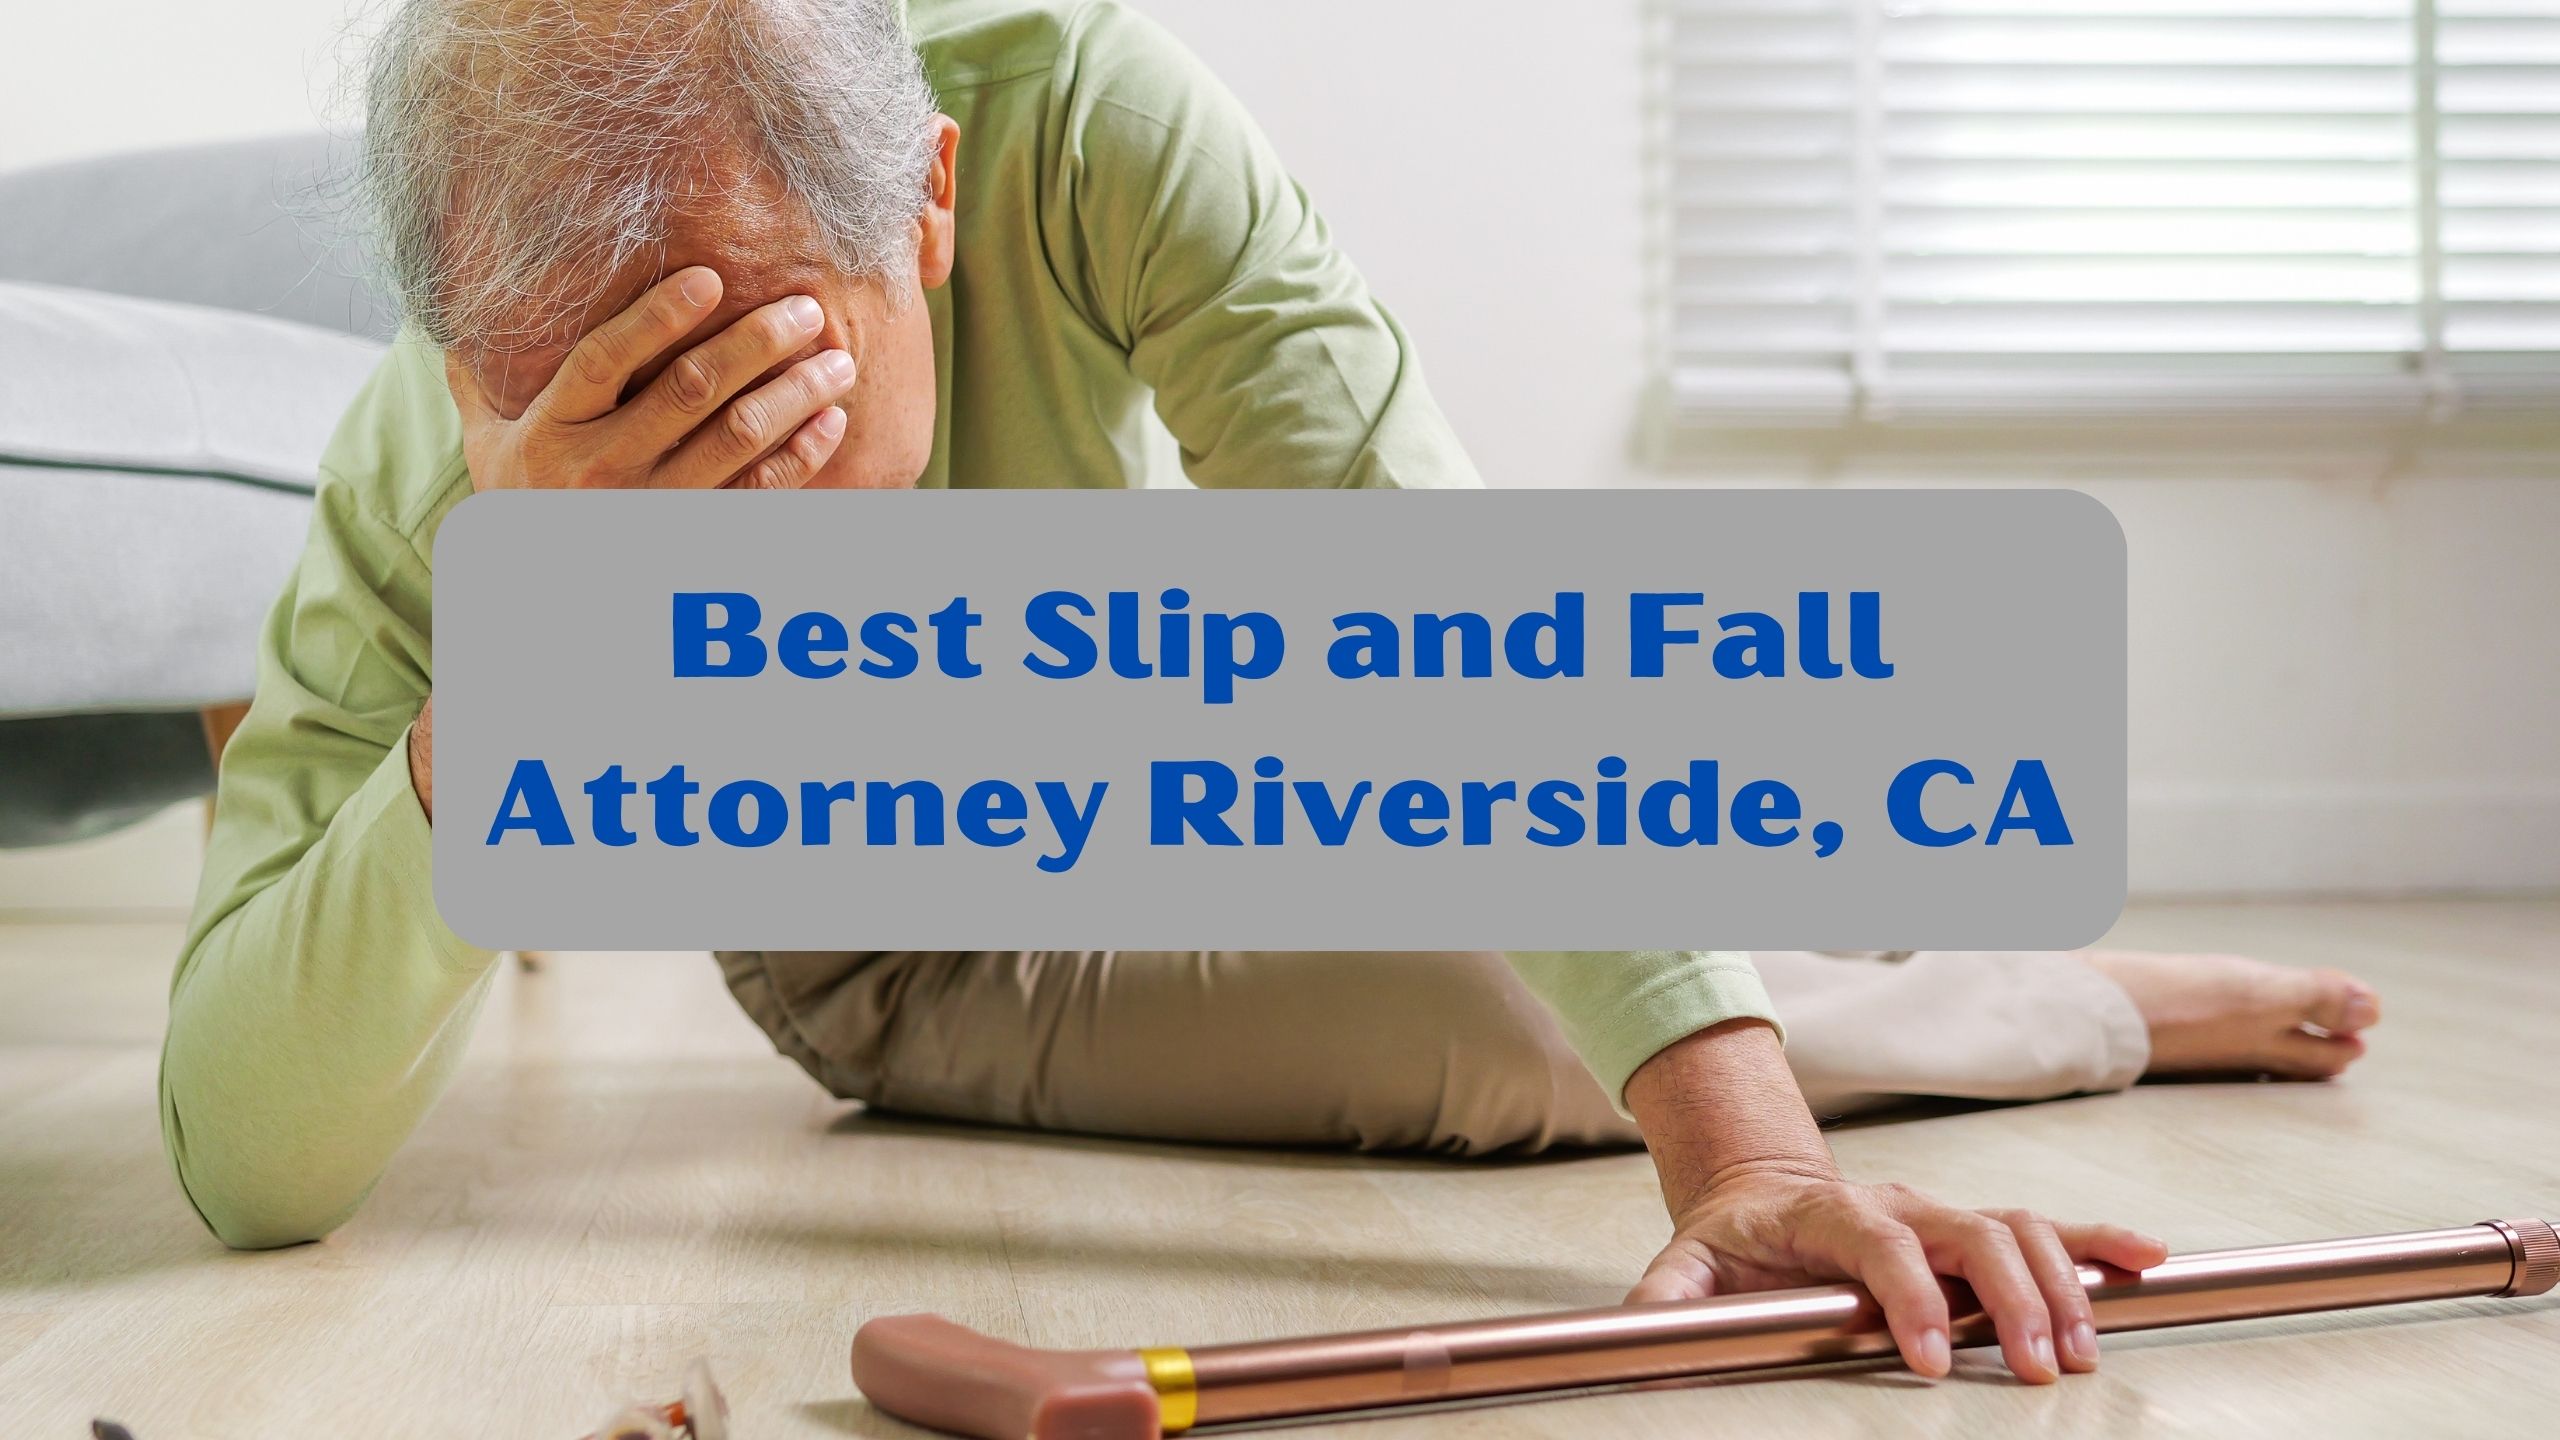 Best Slip and Fall Attorney Riverside